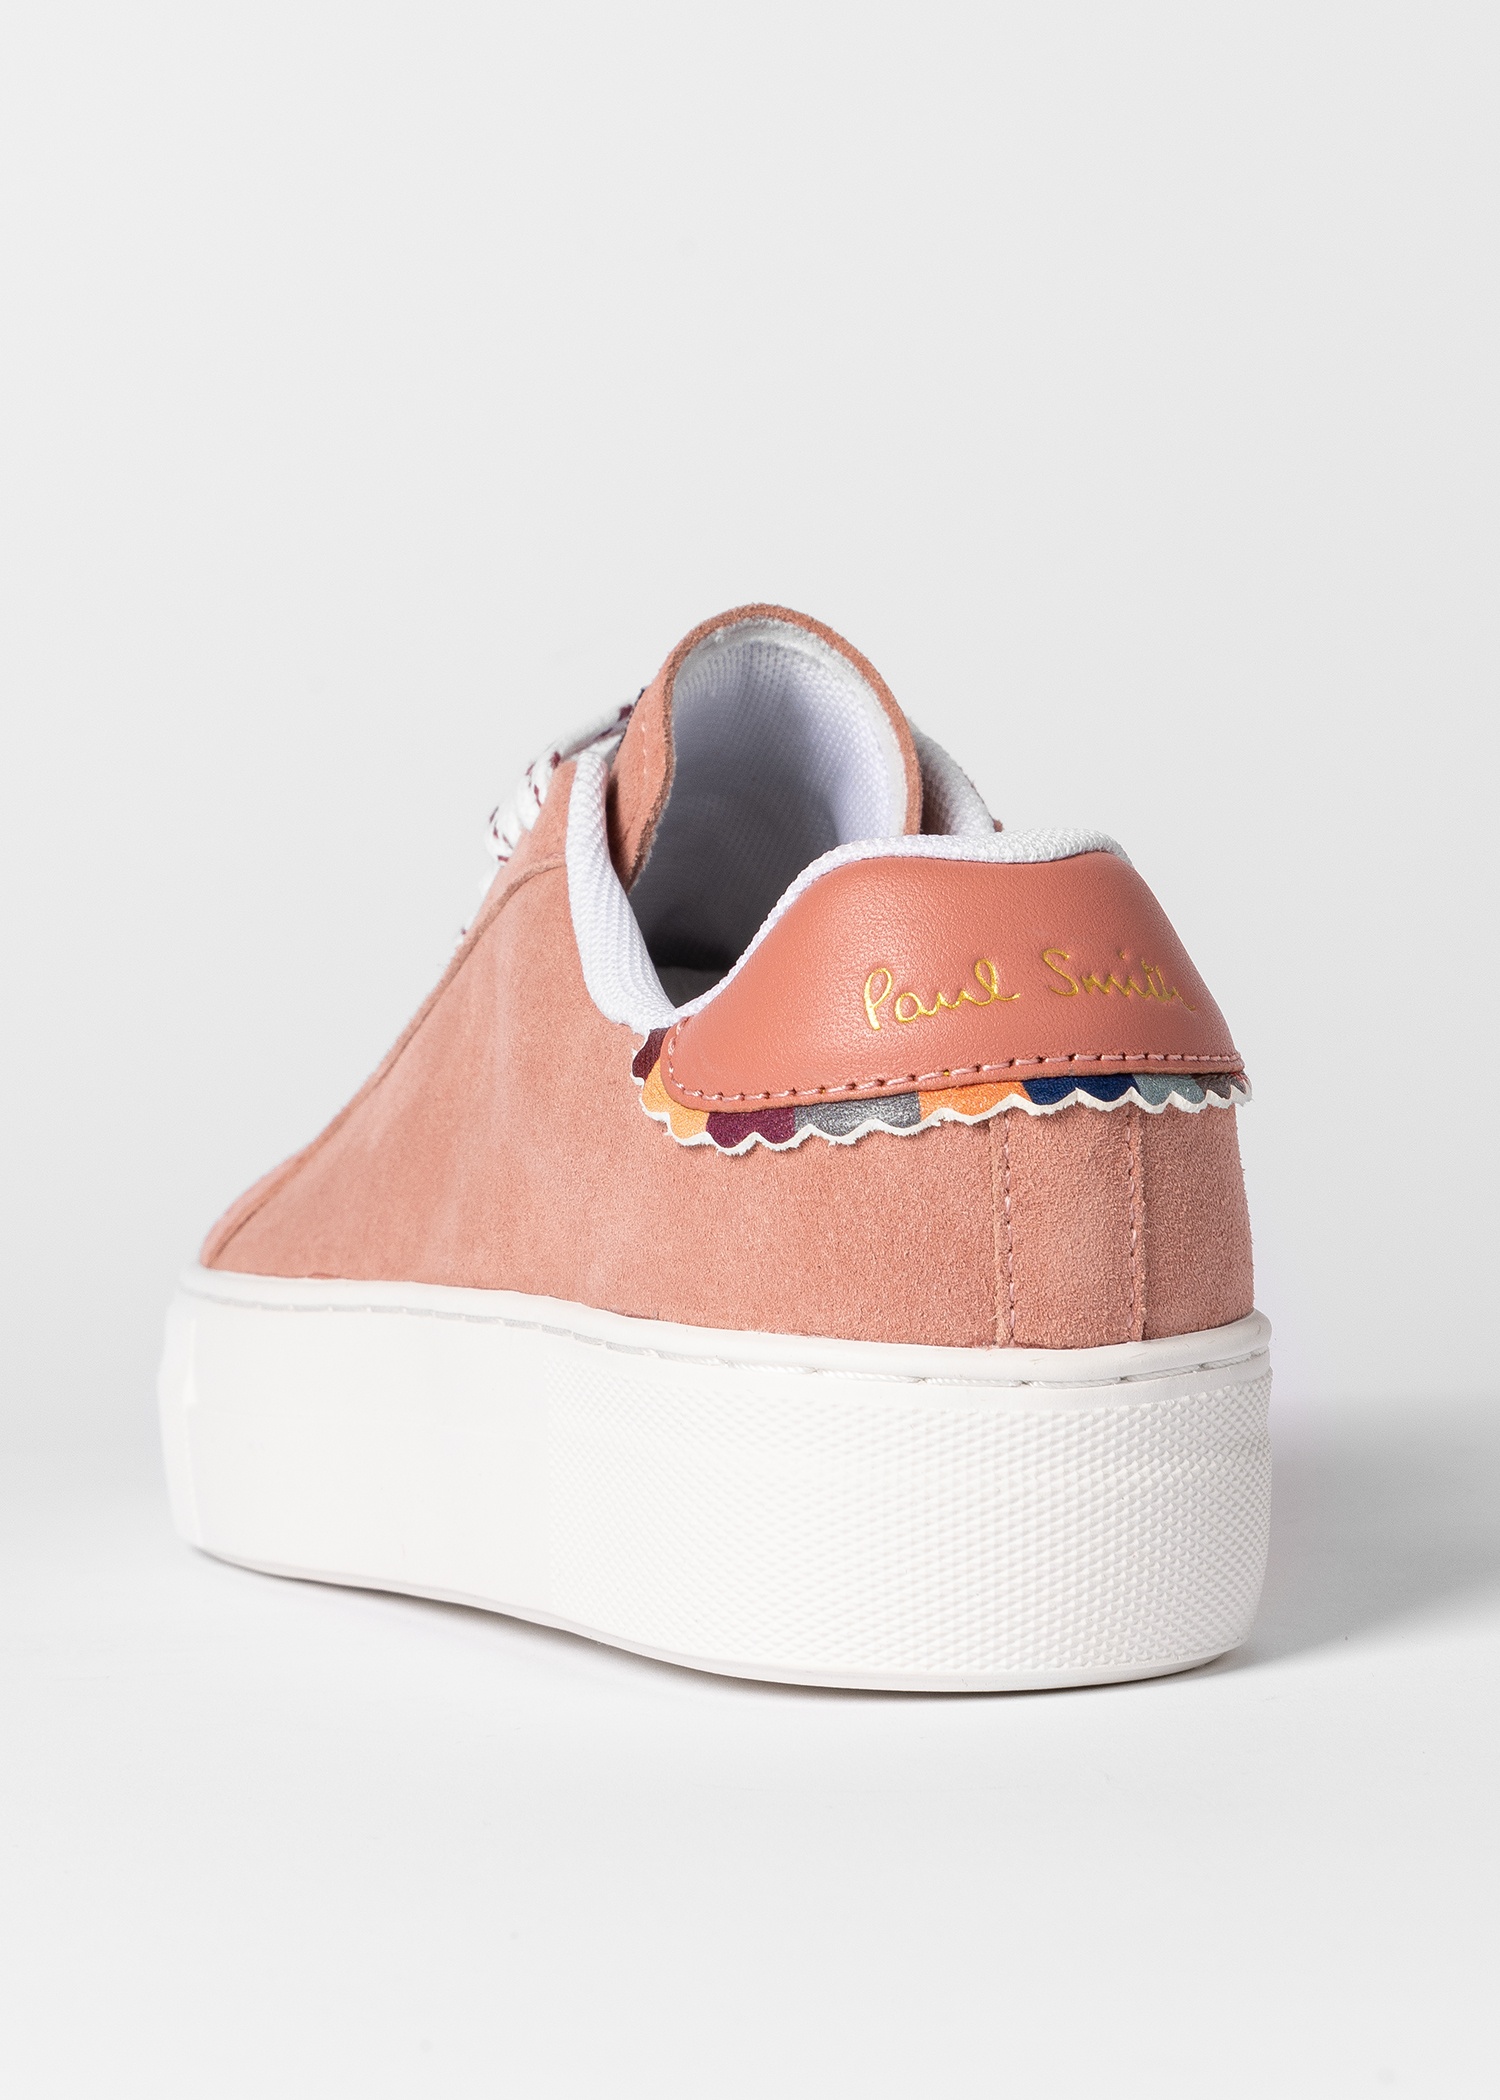 Women's Pink Suede 'Kelly' Trainers - 5